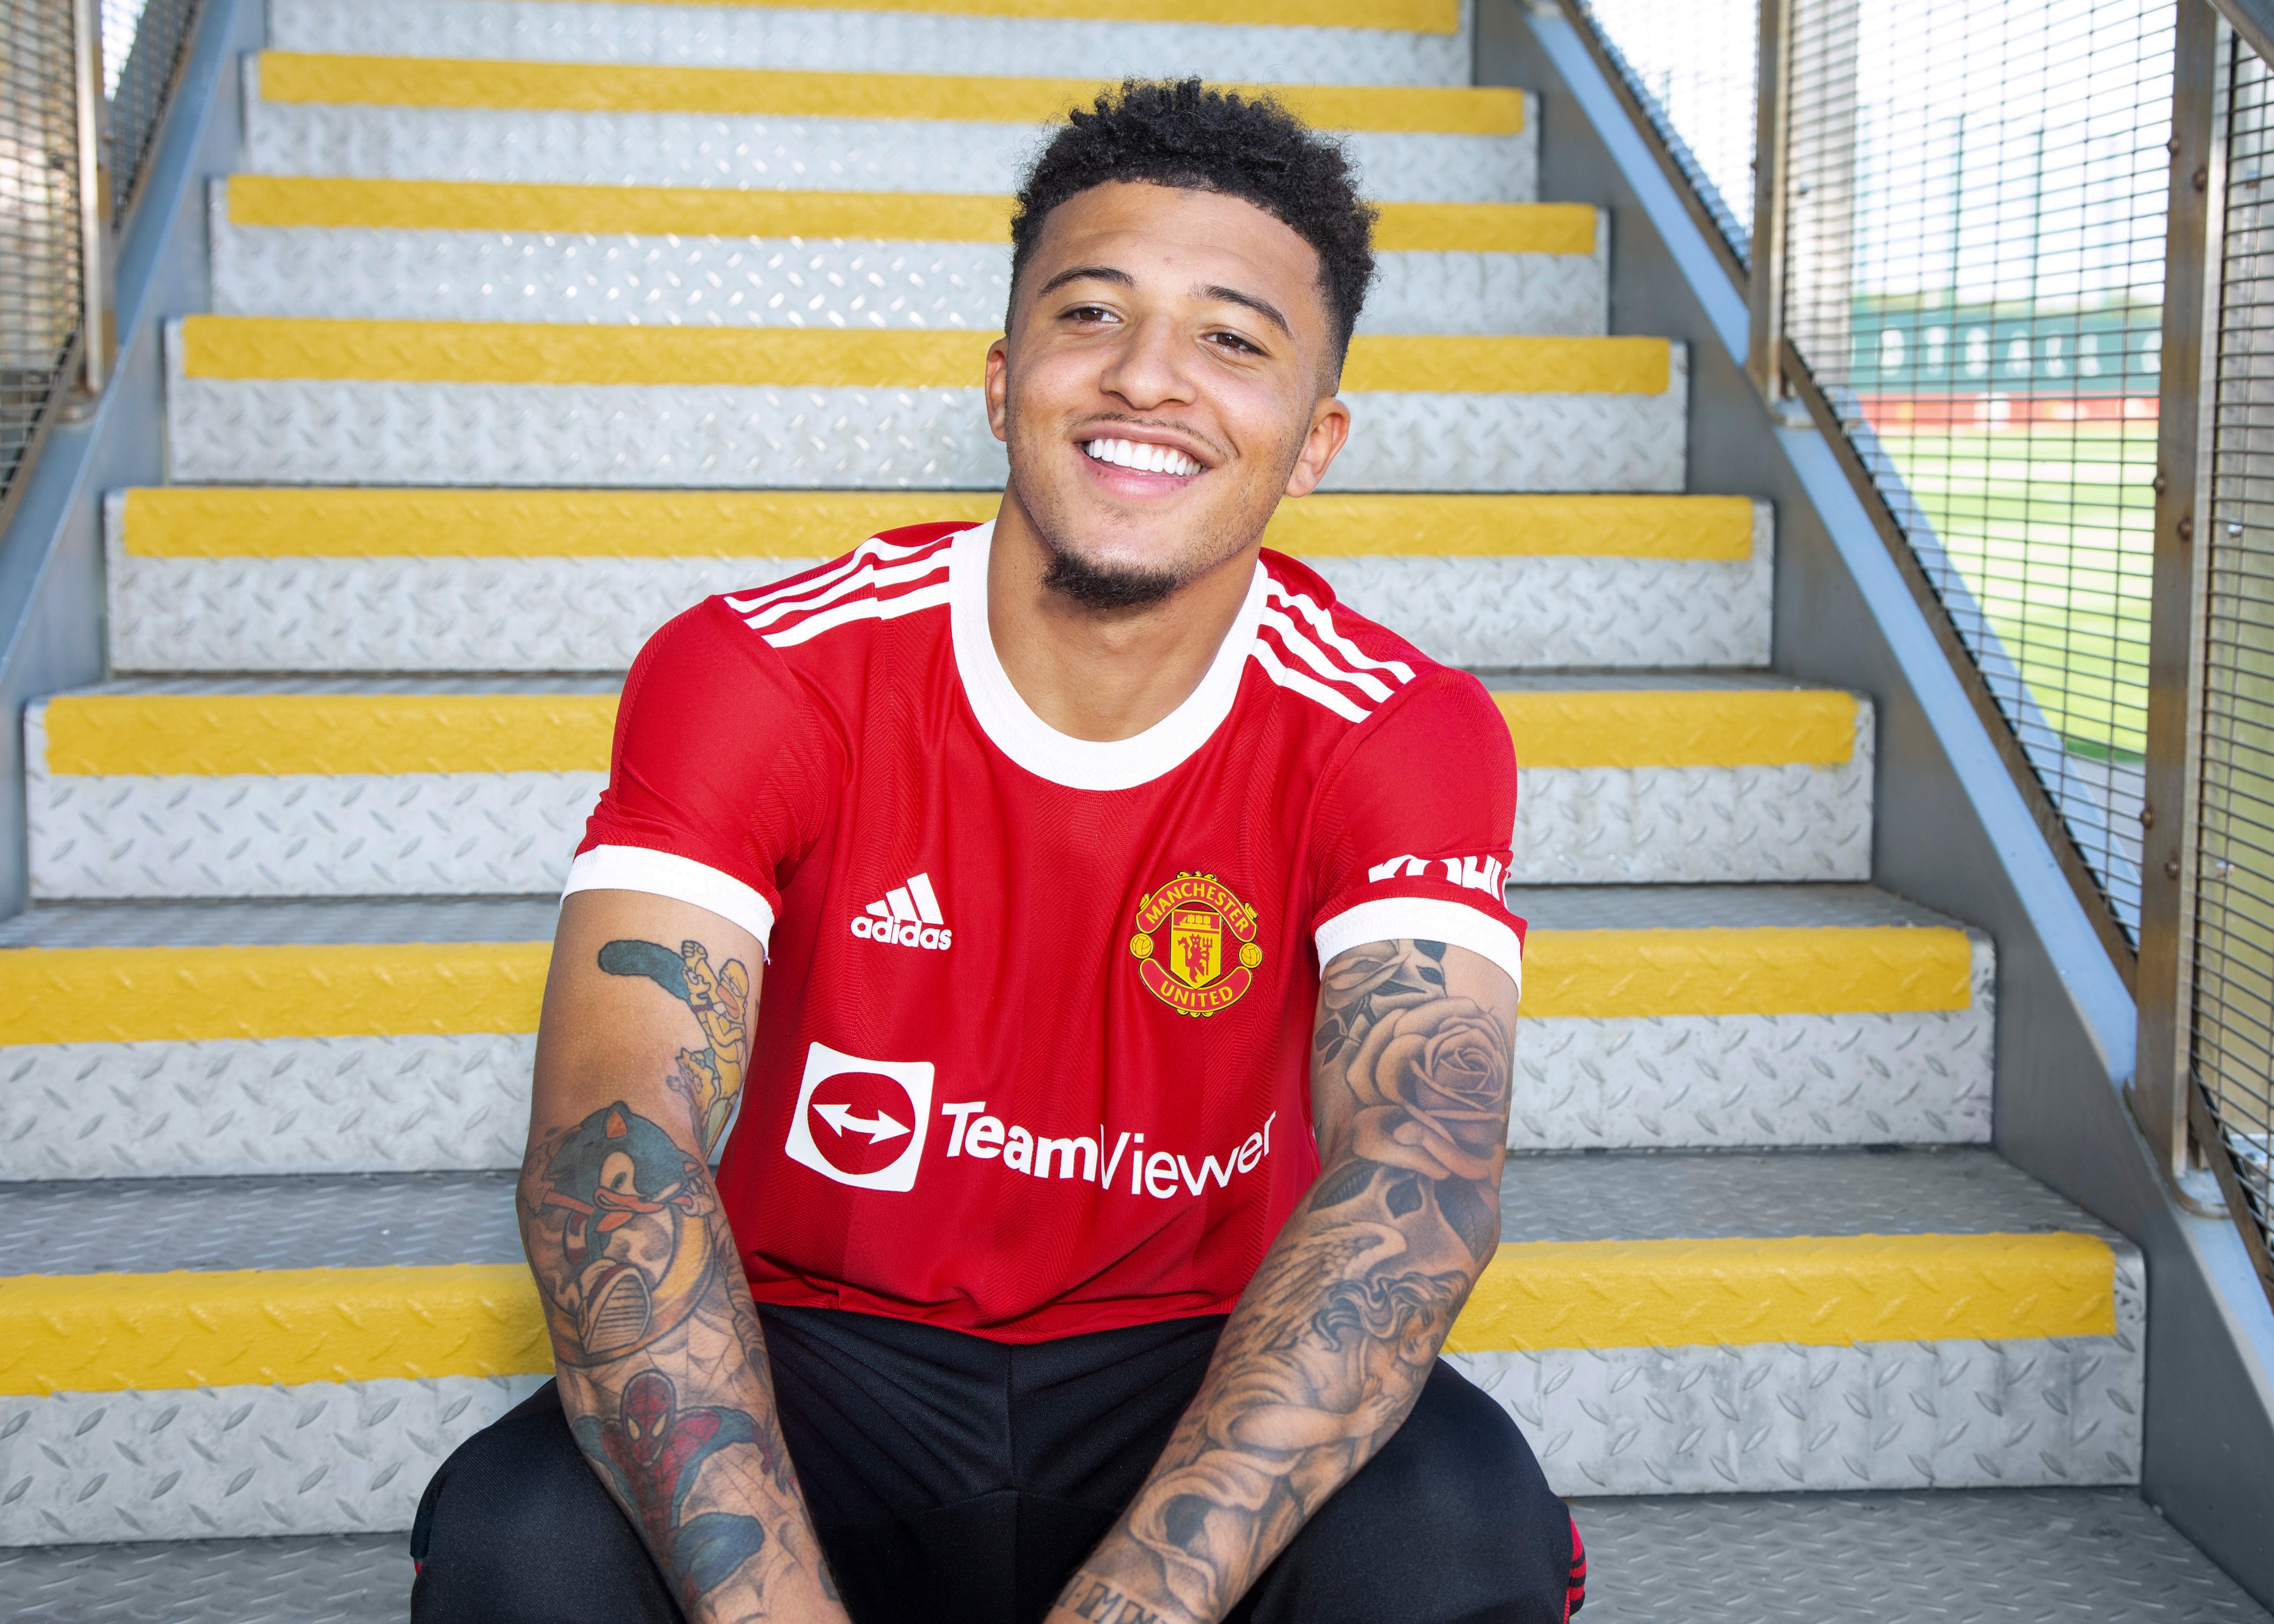 New signing Jadon Sancho of Manchester United is unveiled at the Carrington Training Ground